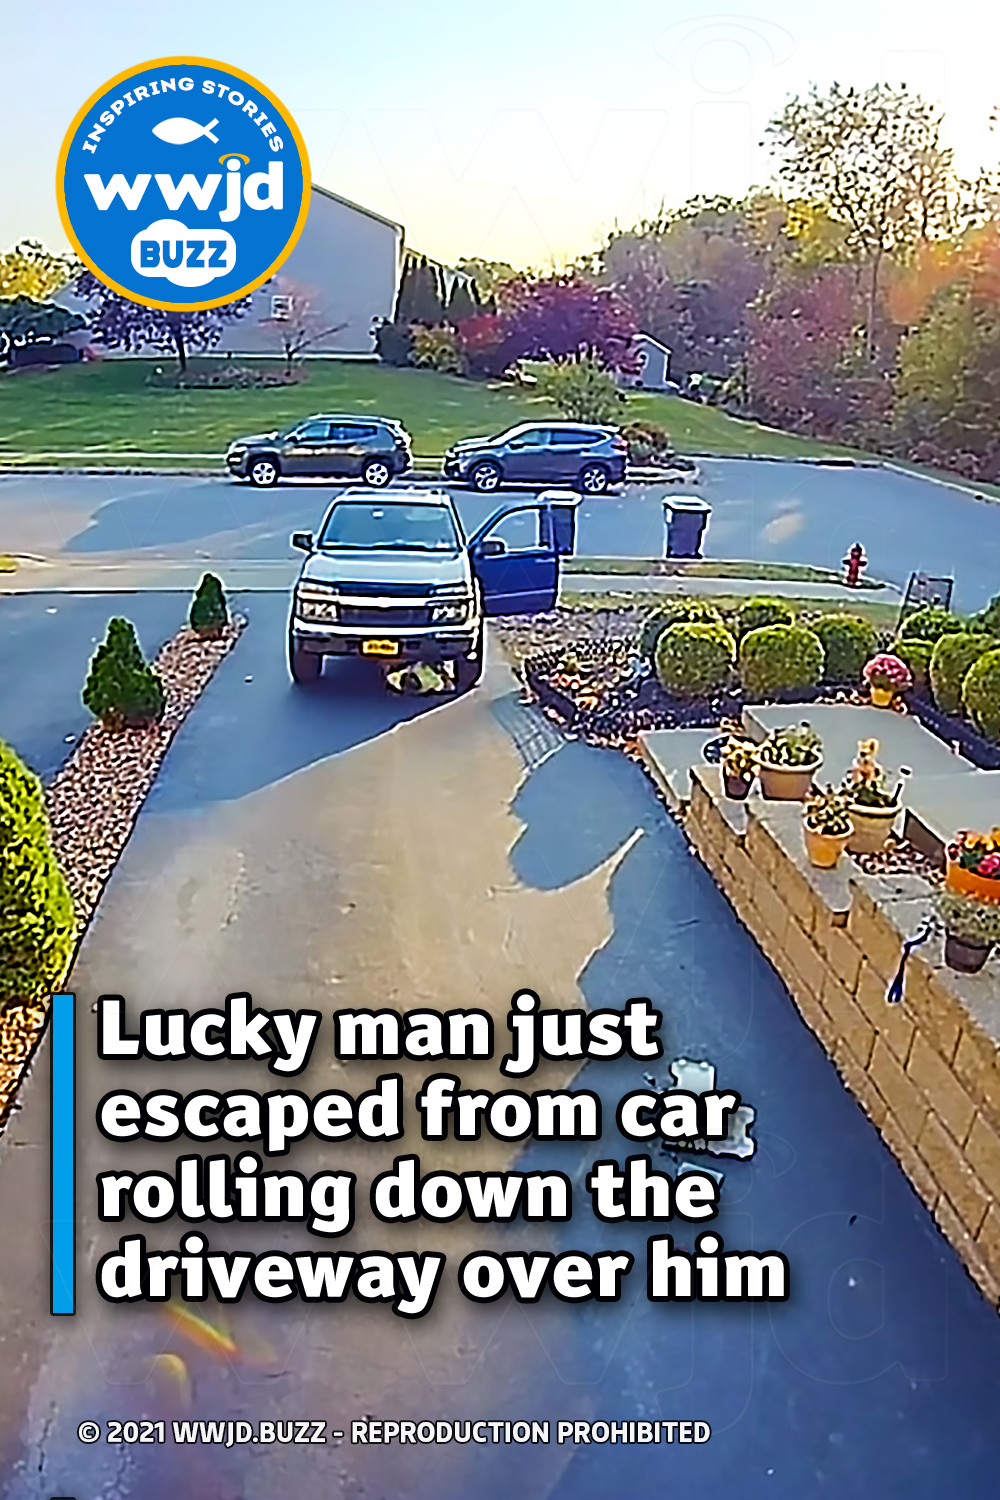 Lucky man just escaped from car rolling down the driveway over him